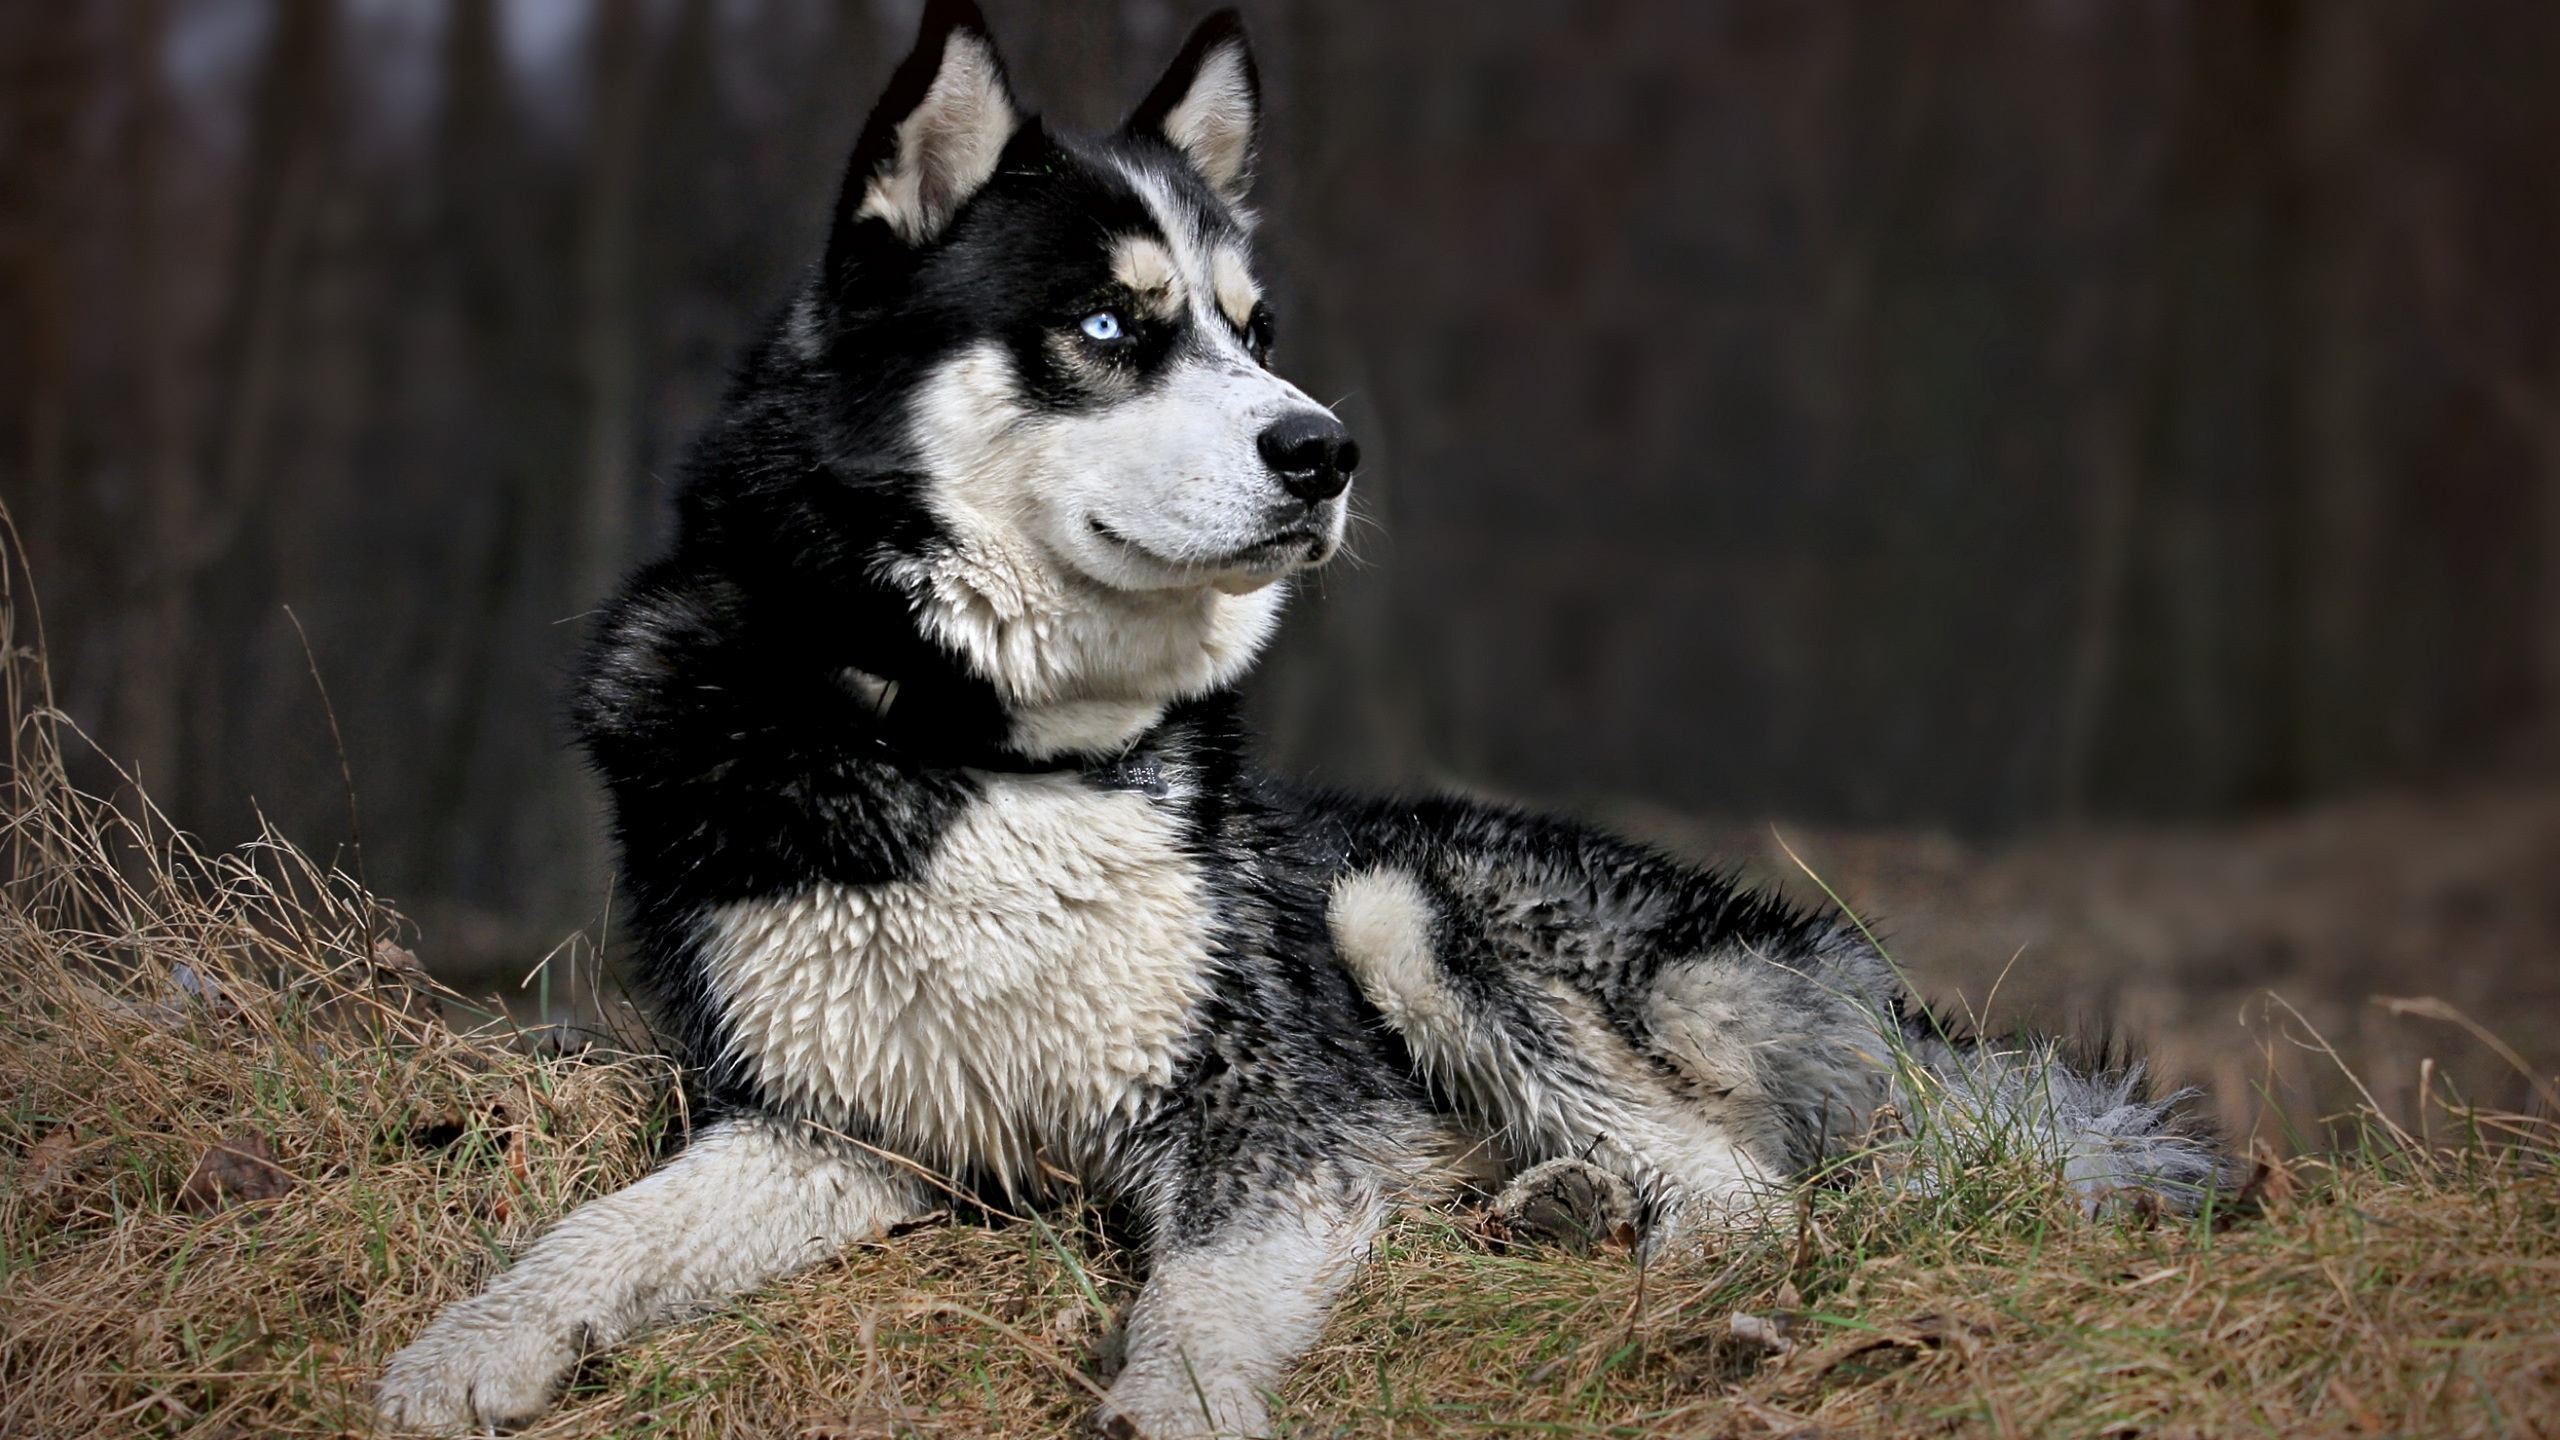 Black and White Siberian Husky Puppy on Brown Grass Field During Daytime. Wallpaper in 2560x1440 Resolution